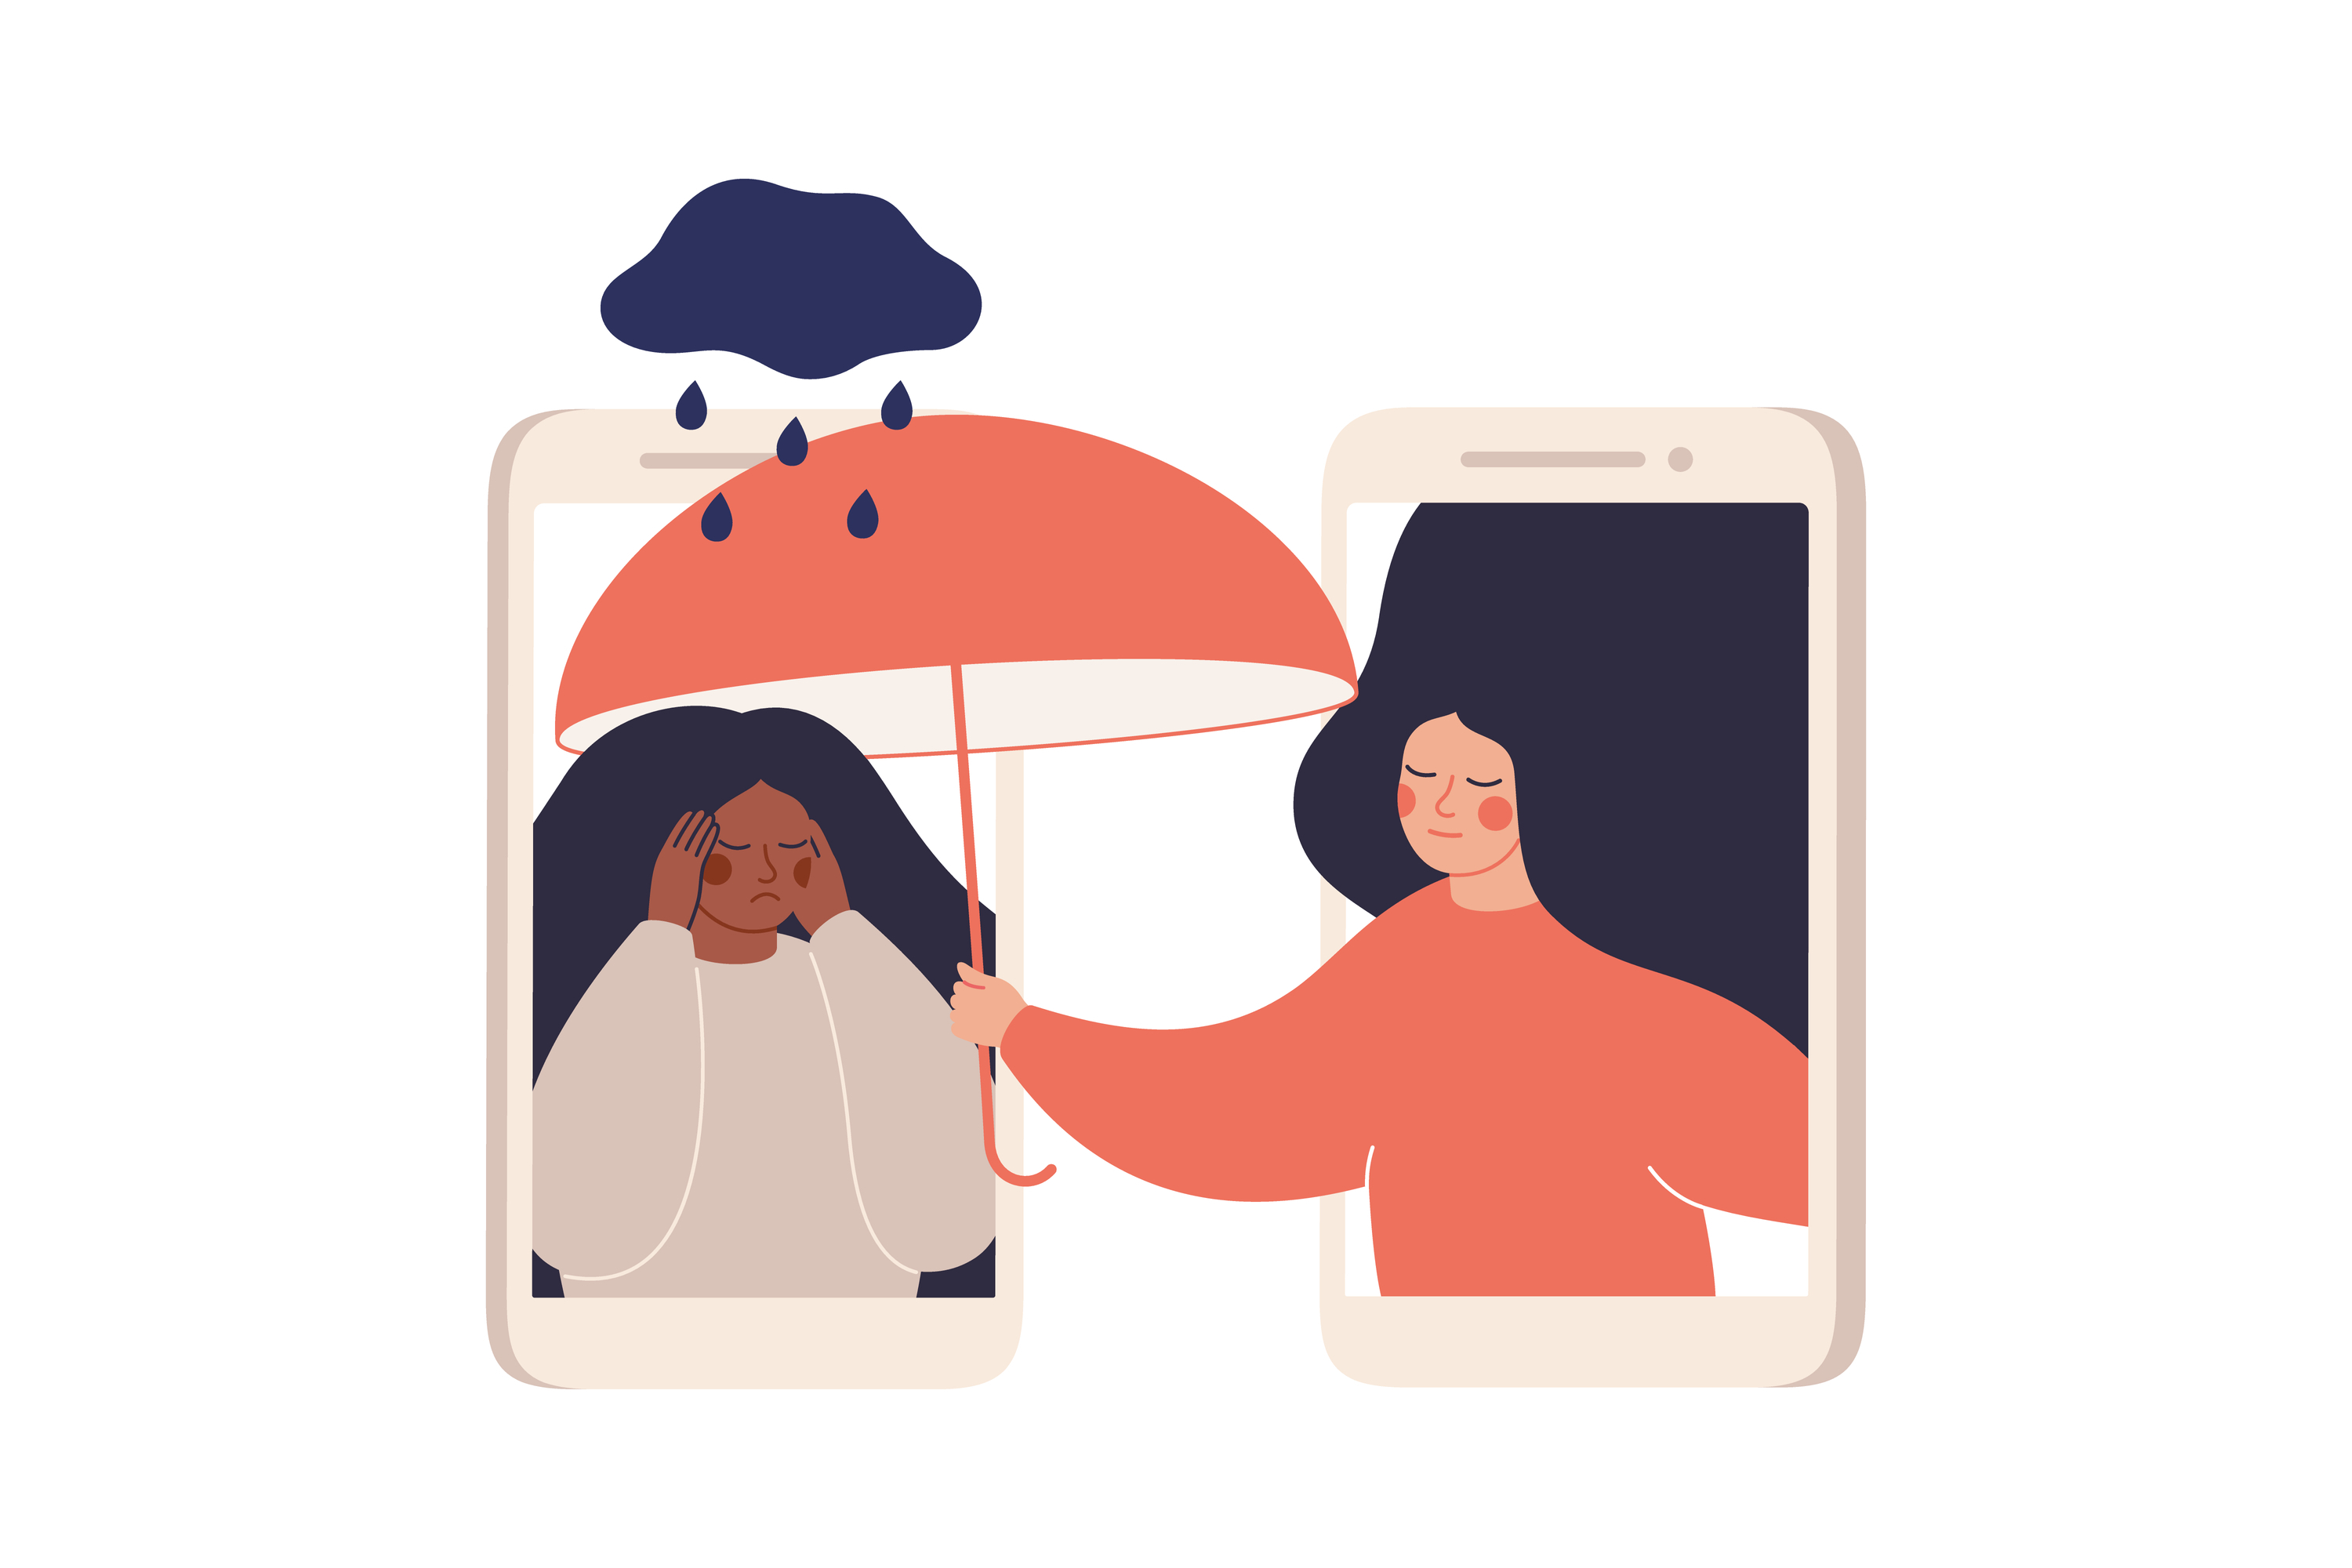 person reaching through cell screen to hold umbrella over another person in another screen